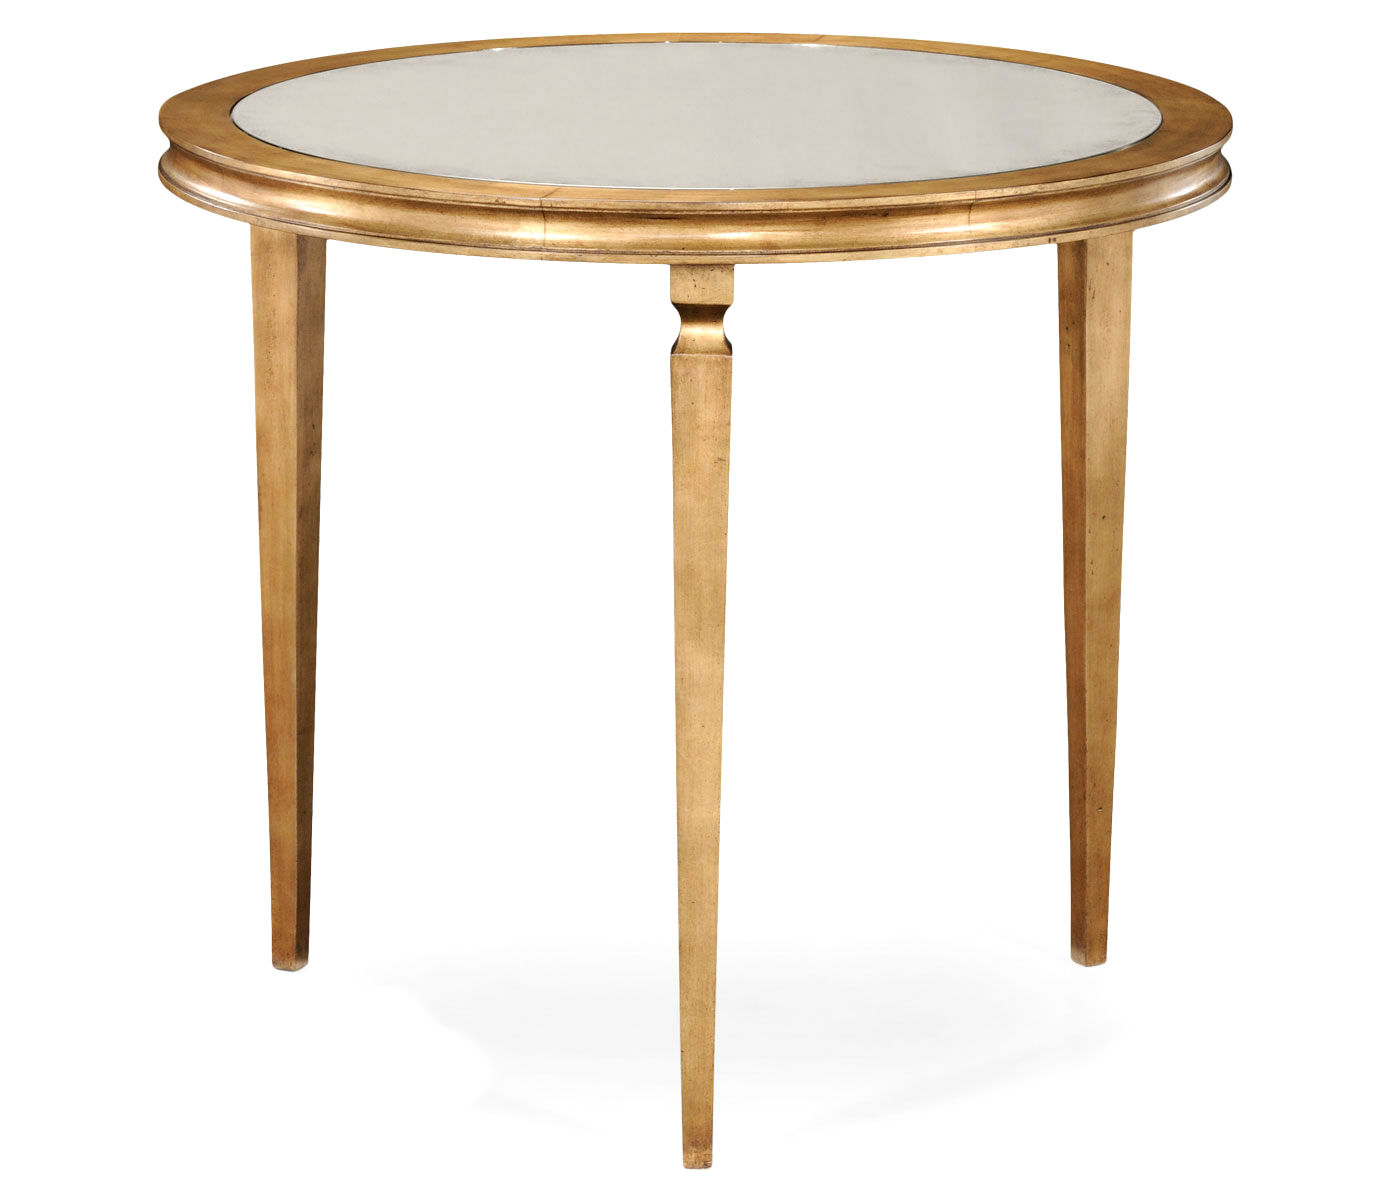 italian tables style gold side antique accent table classic tall mirrored antiqued gilded partner end console coffee available hospitality black legs dining room chandeliers small